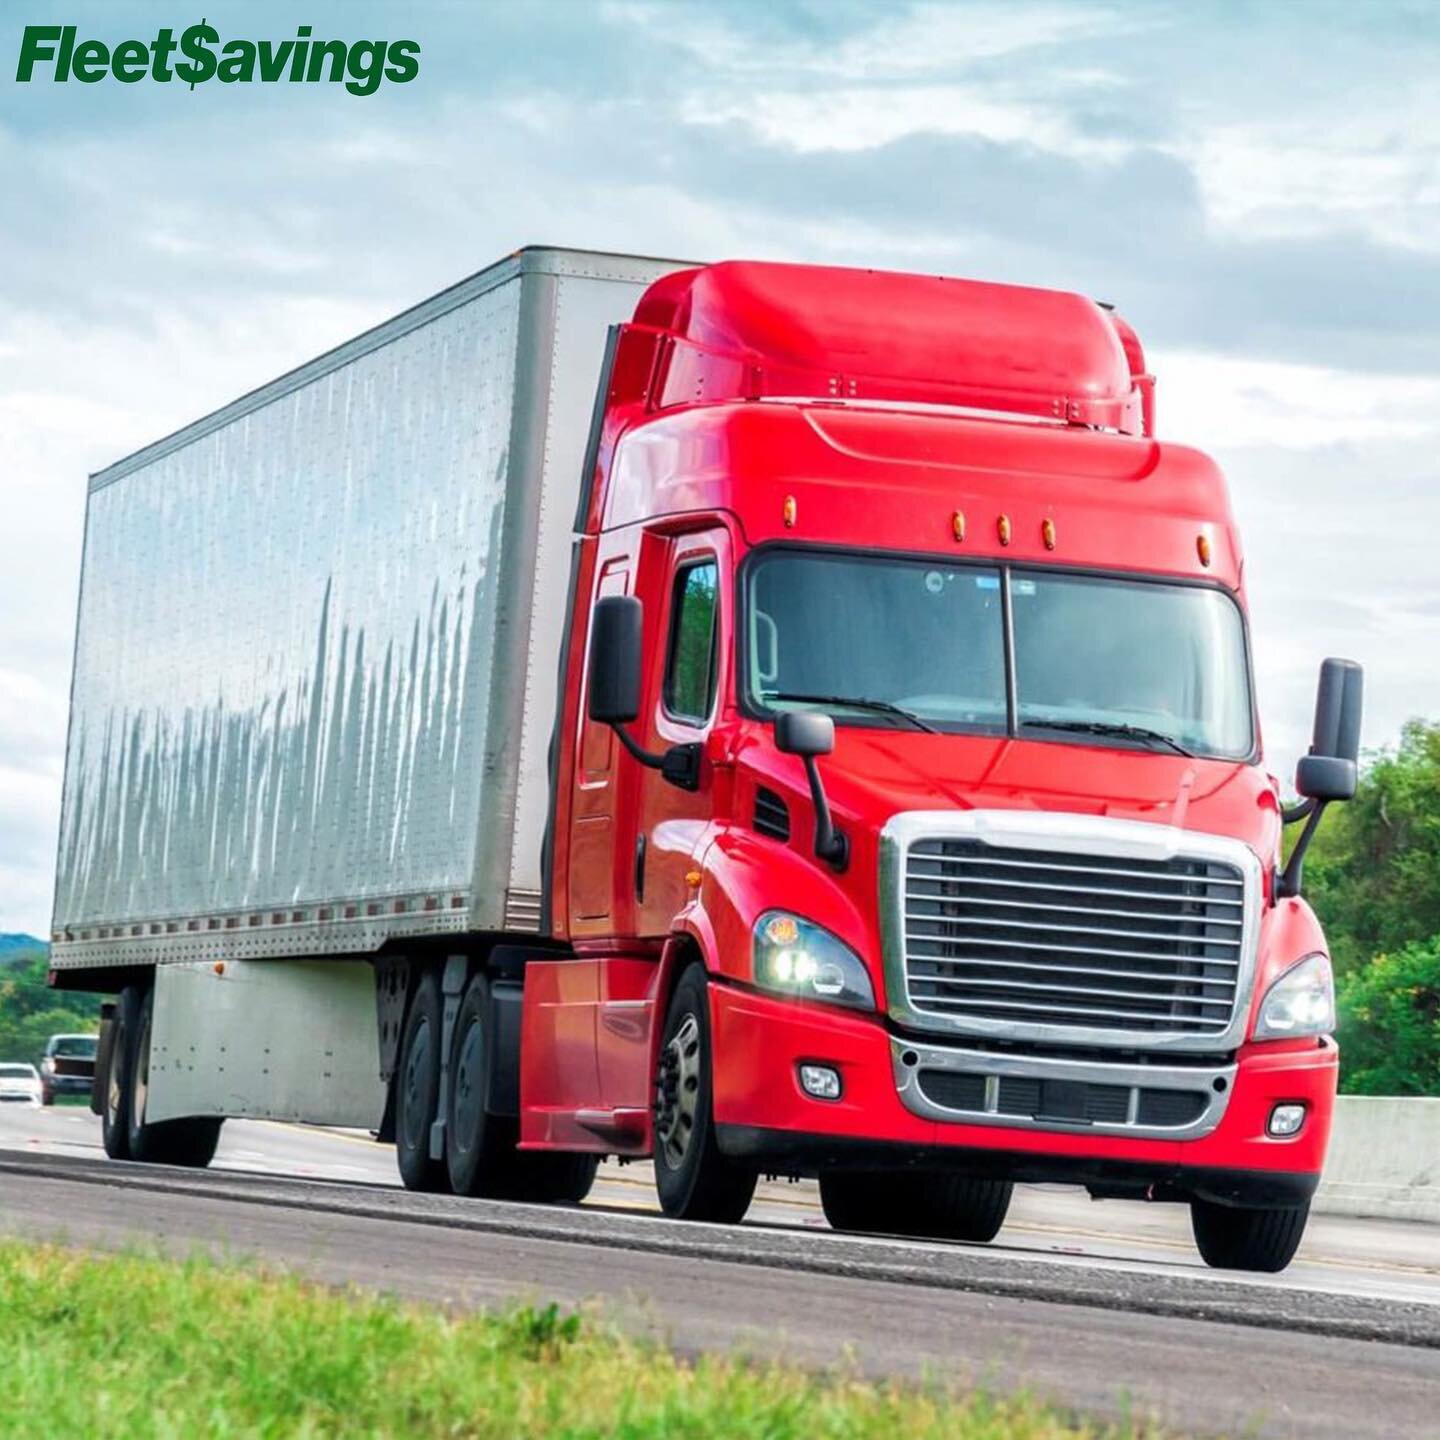 Fleet$avings offers comprehensive and affordable trucking insurance. This is&nbsp;critical to protecting your assets and cargo on the road.